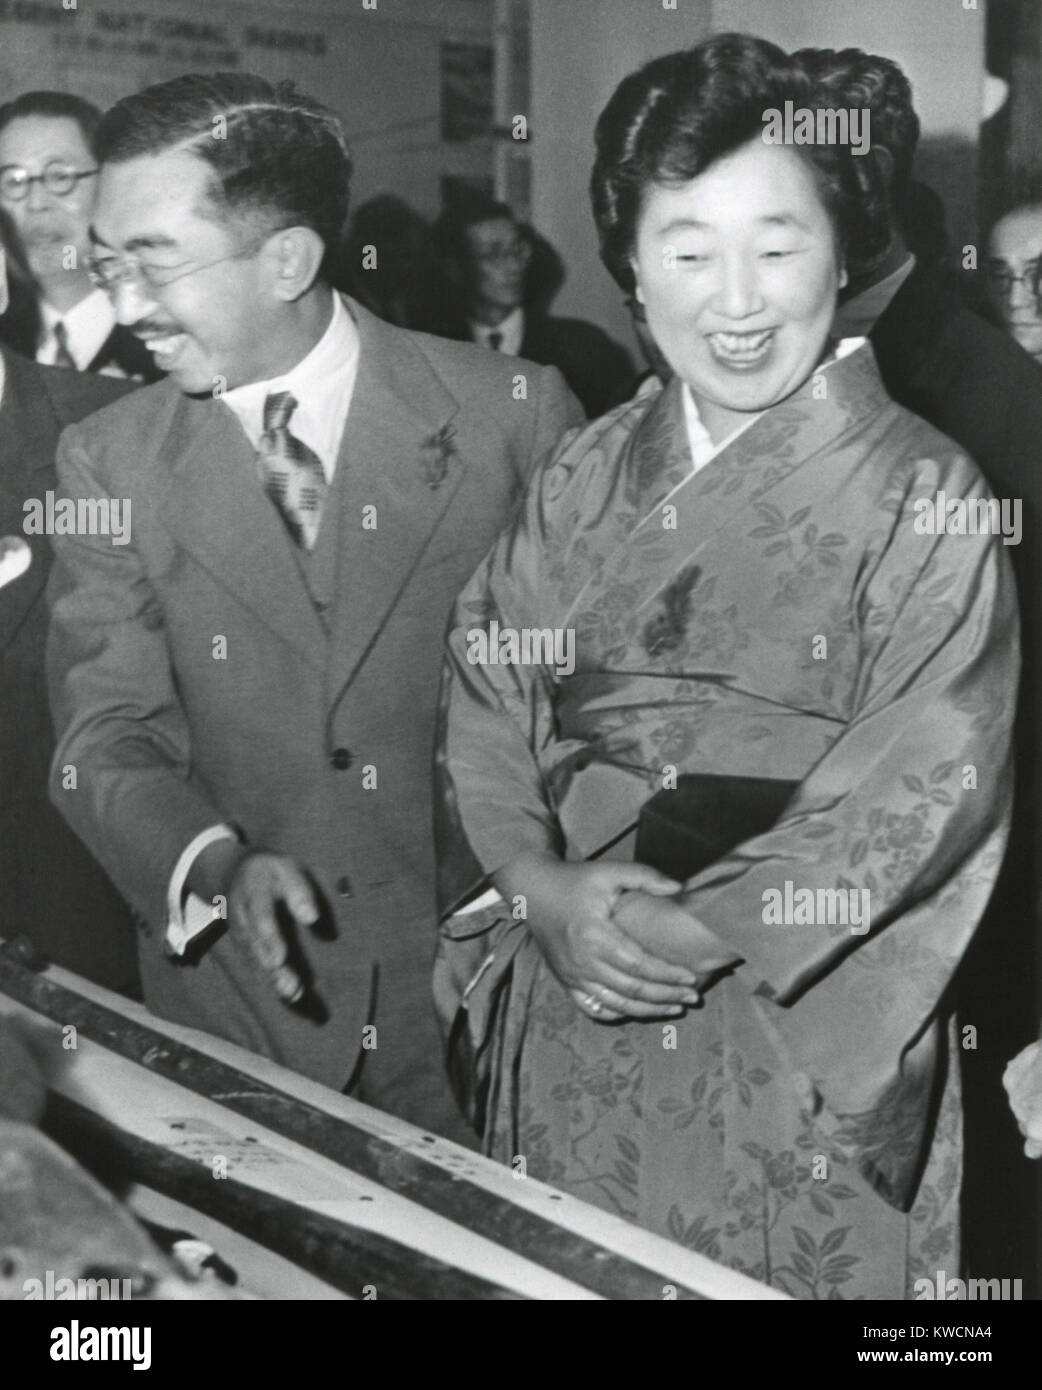 Emperor Hirohito and Empress Nagako at an exhibition at a Tokyo Department store. Oct. 27, 1949. Both wear small red feathers showing they contributed to the Japanese Community Chest Drive. - (BSLOC 2014 15 141) Stock Photo